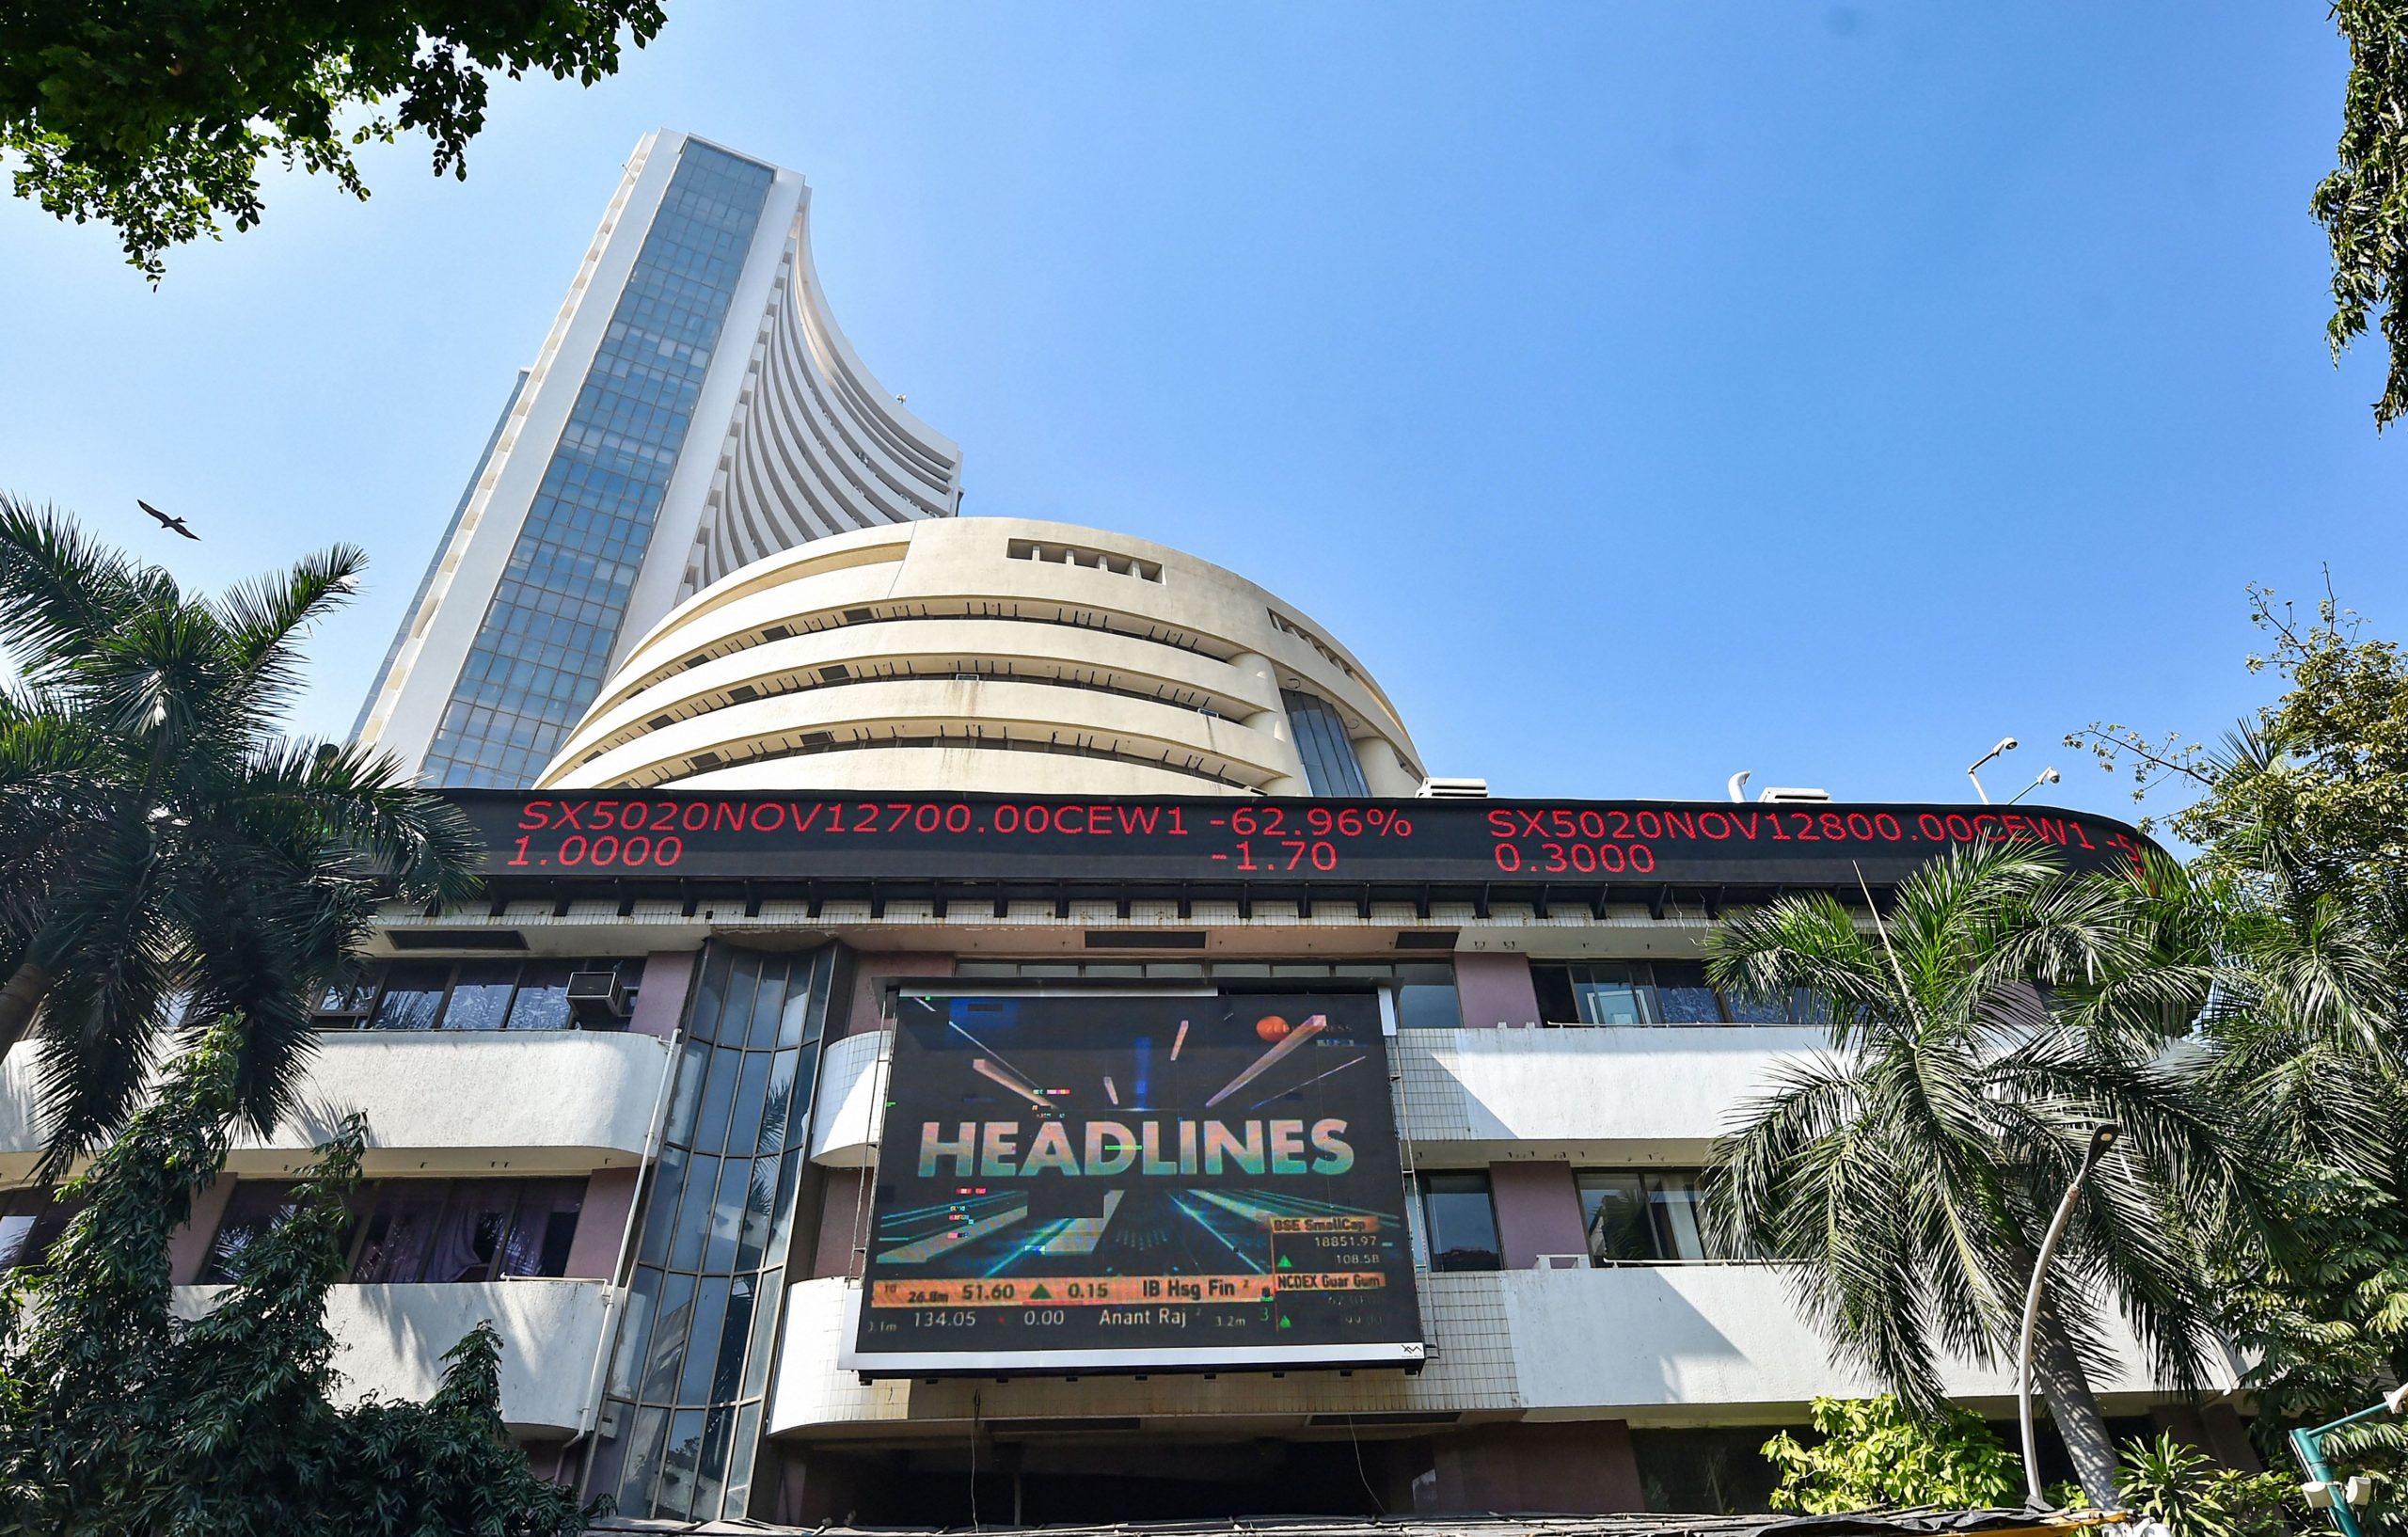 Trending Stocks: Tata Group, Coal India, NTPC, TVS and others in news today